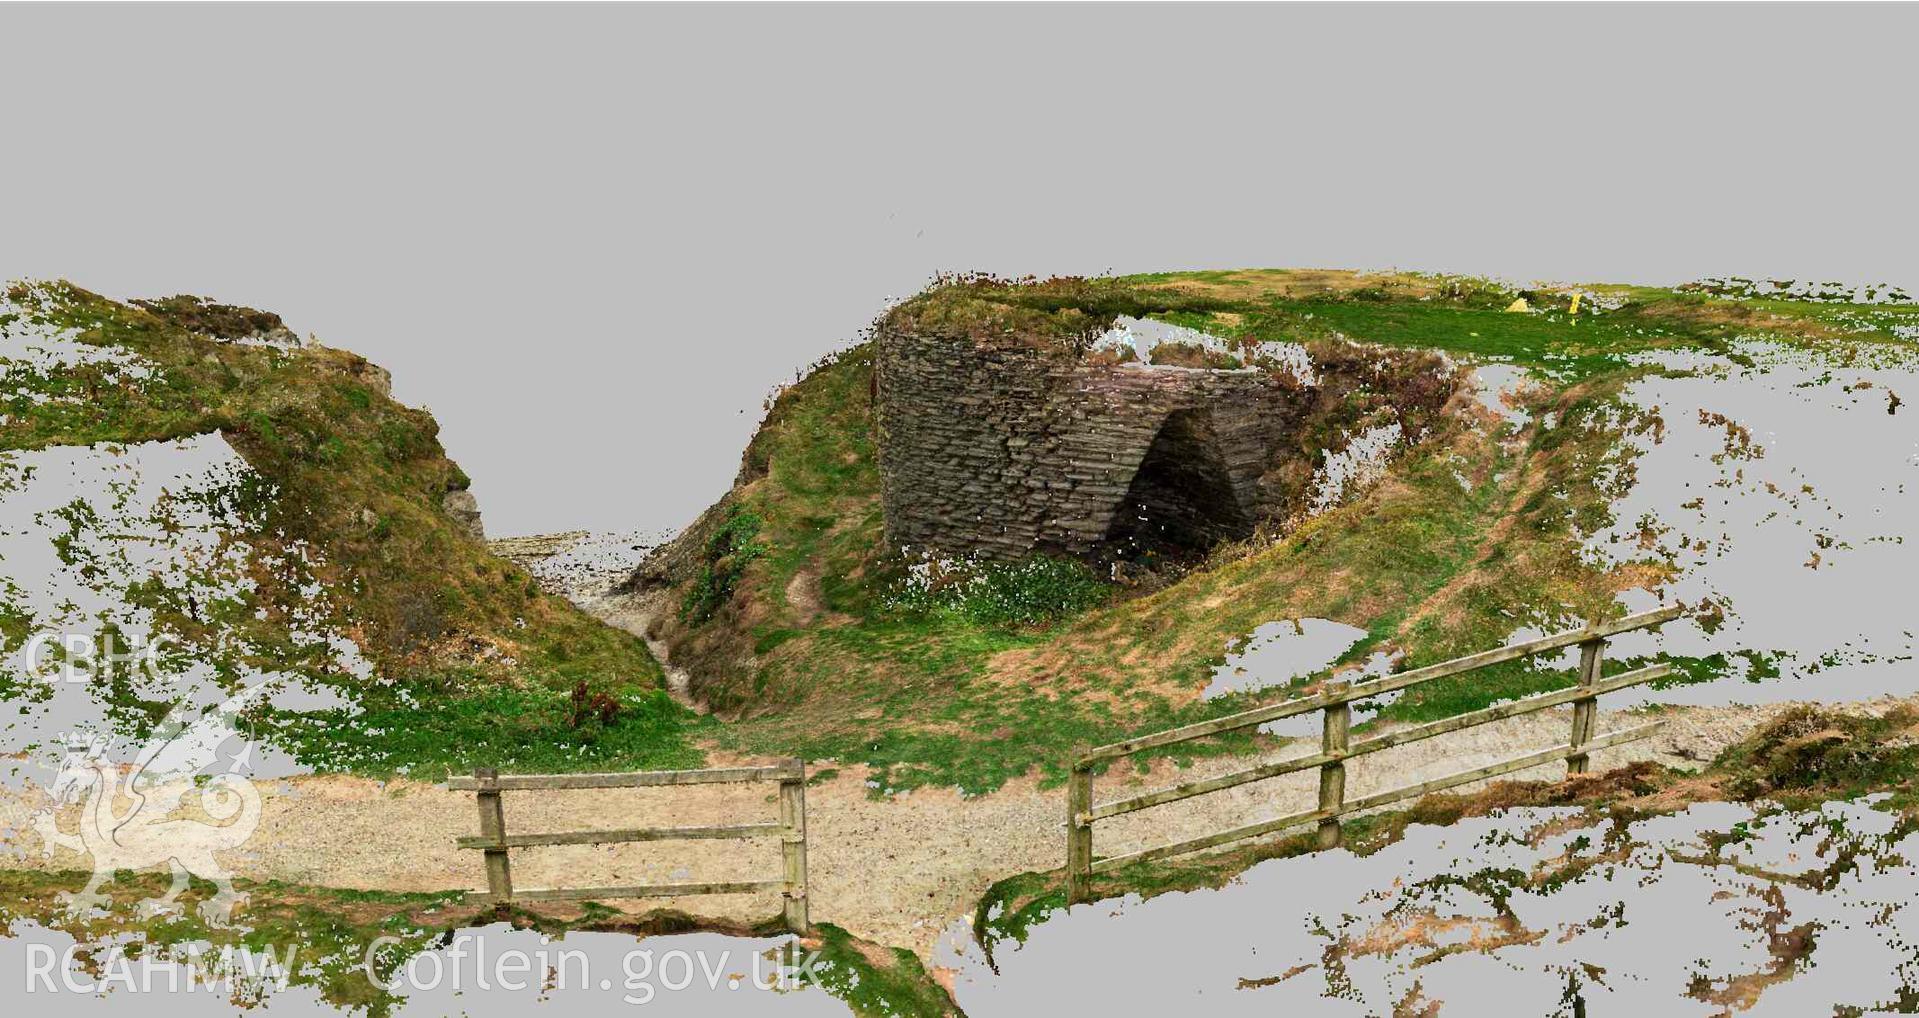 View of limekiln looking towards the coast (River Teifi  estuary), showing the coastal path in the foreground. Part of a Terrestrial Laser Scanning Survey archive for Craig-y-Gwbert limekiln, carried out by Dr Jayne Kamintzis of RCAHMW on 20 September 2022.